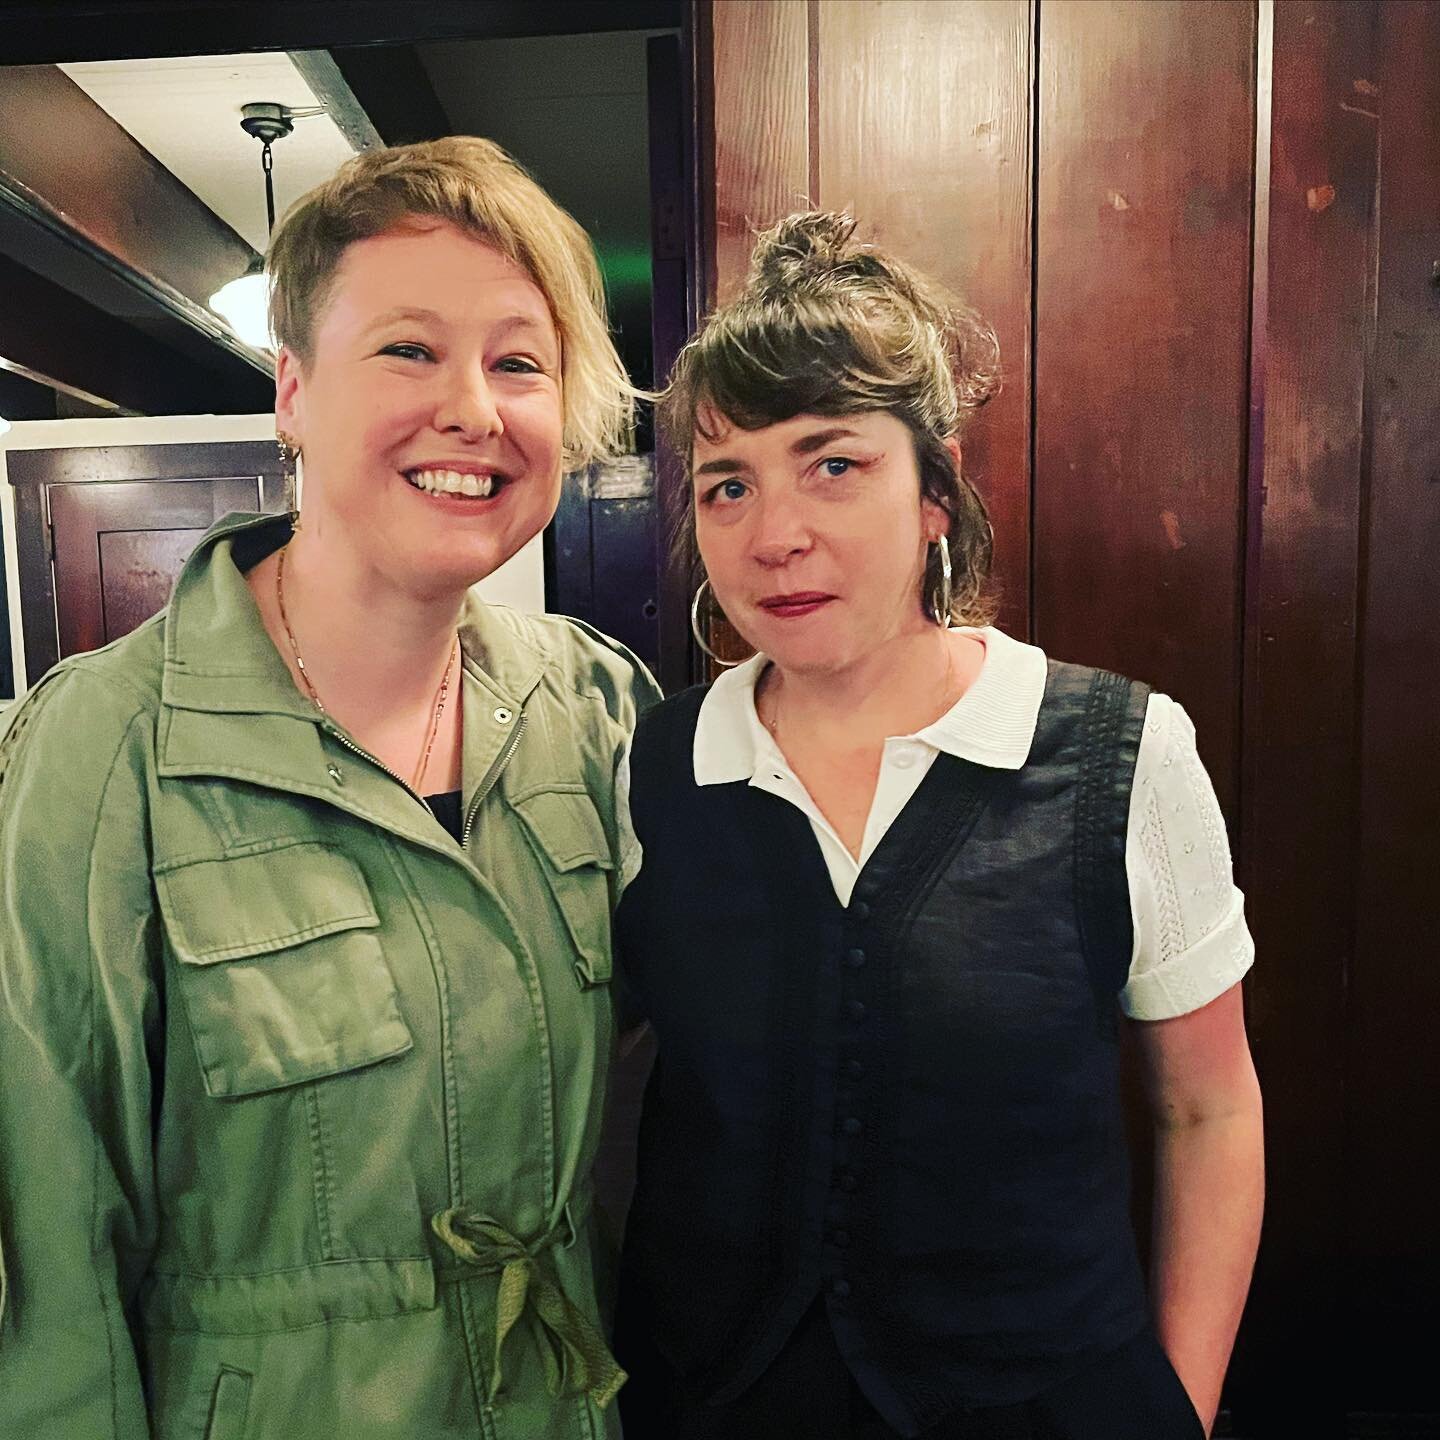 Amazing gig this evening- @lisaoneillmusic @swedishamericanhall San Francisco &amp; soo lovely to chat with Lisa afterwards. What an incredible songwriter! 🙏🏻